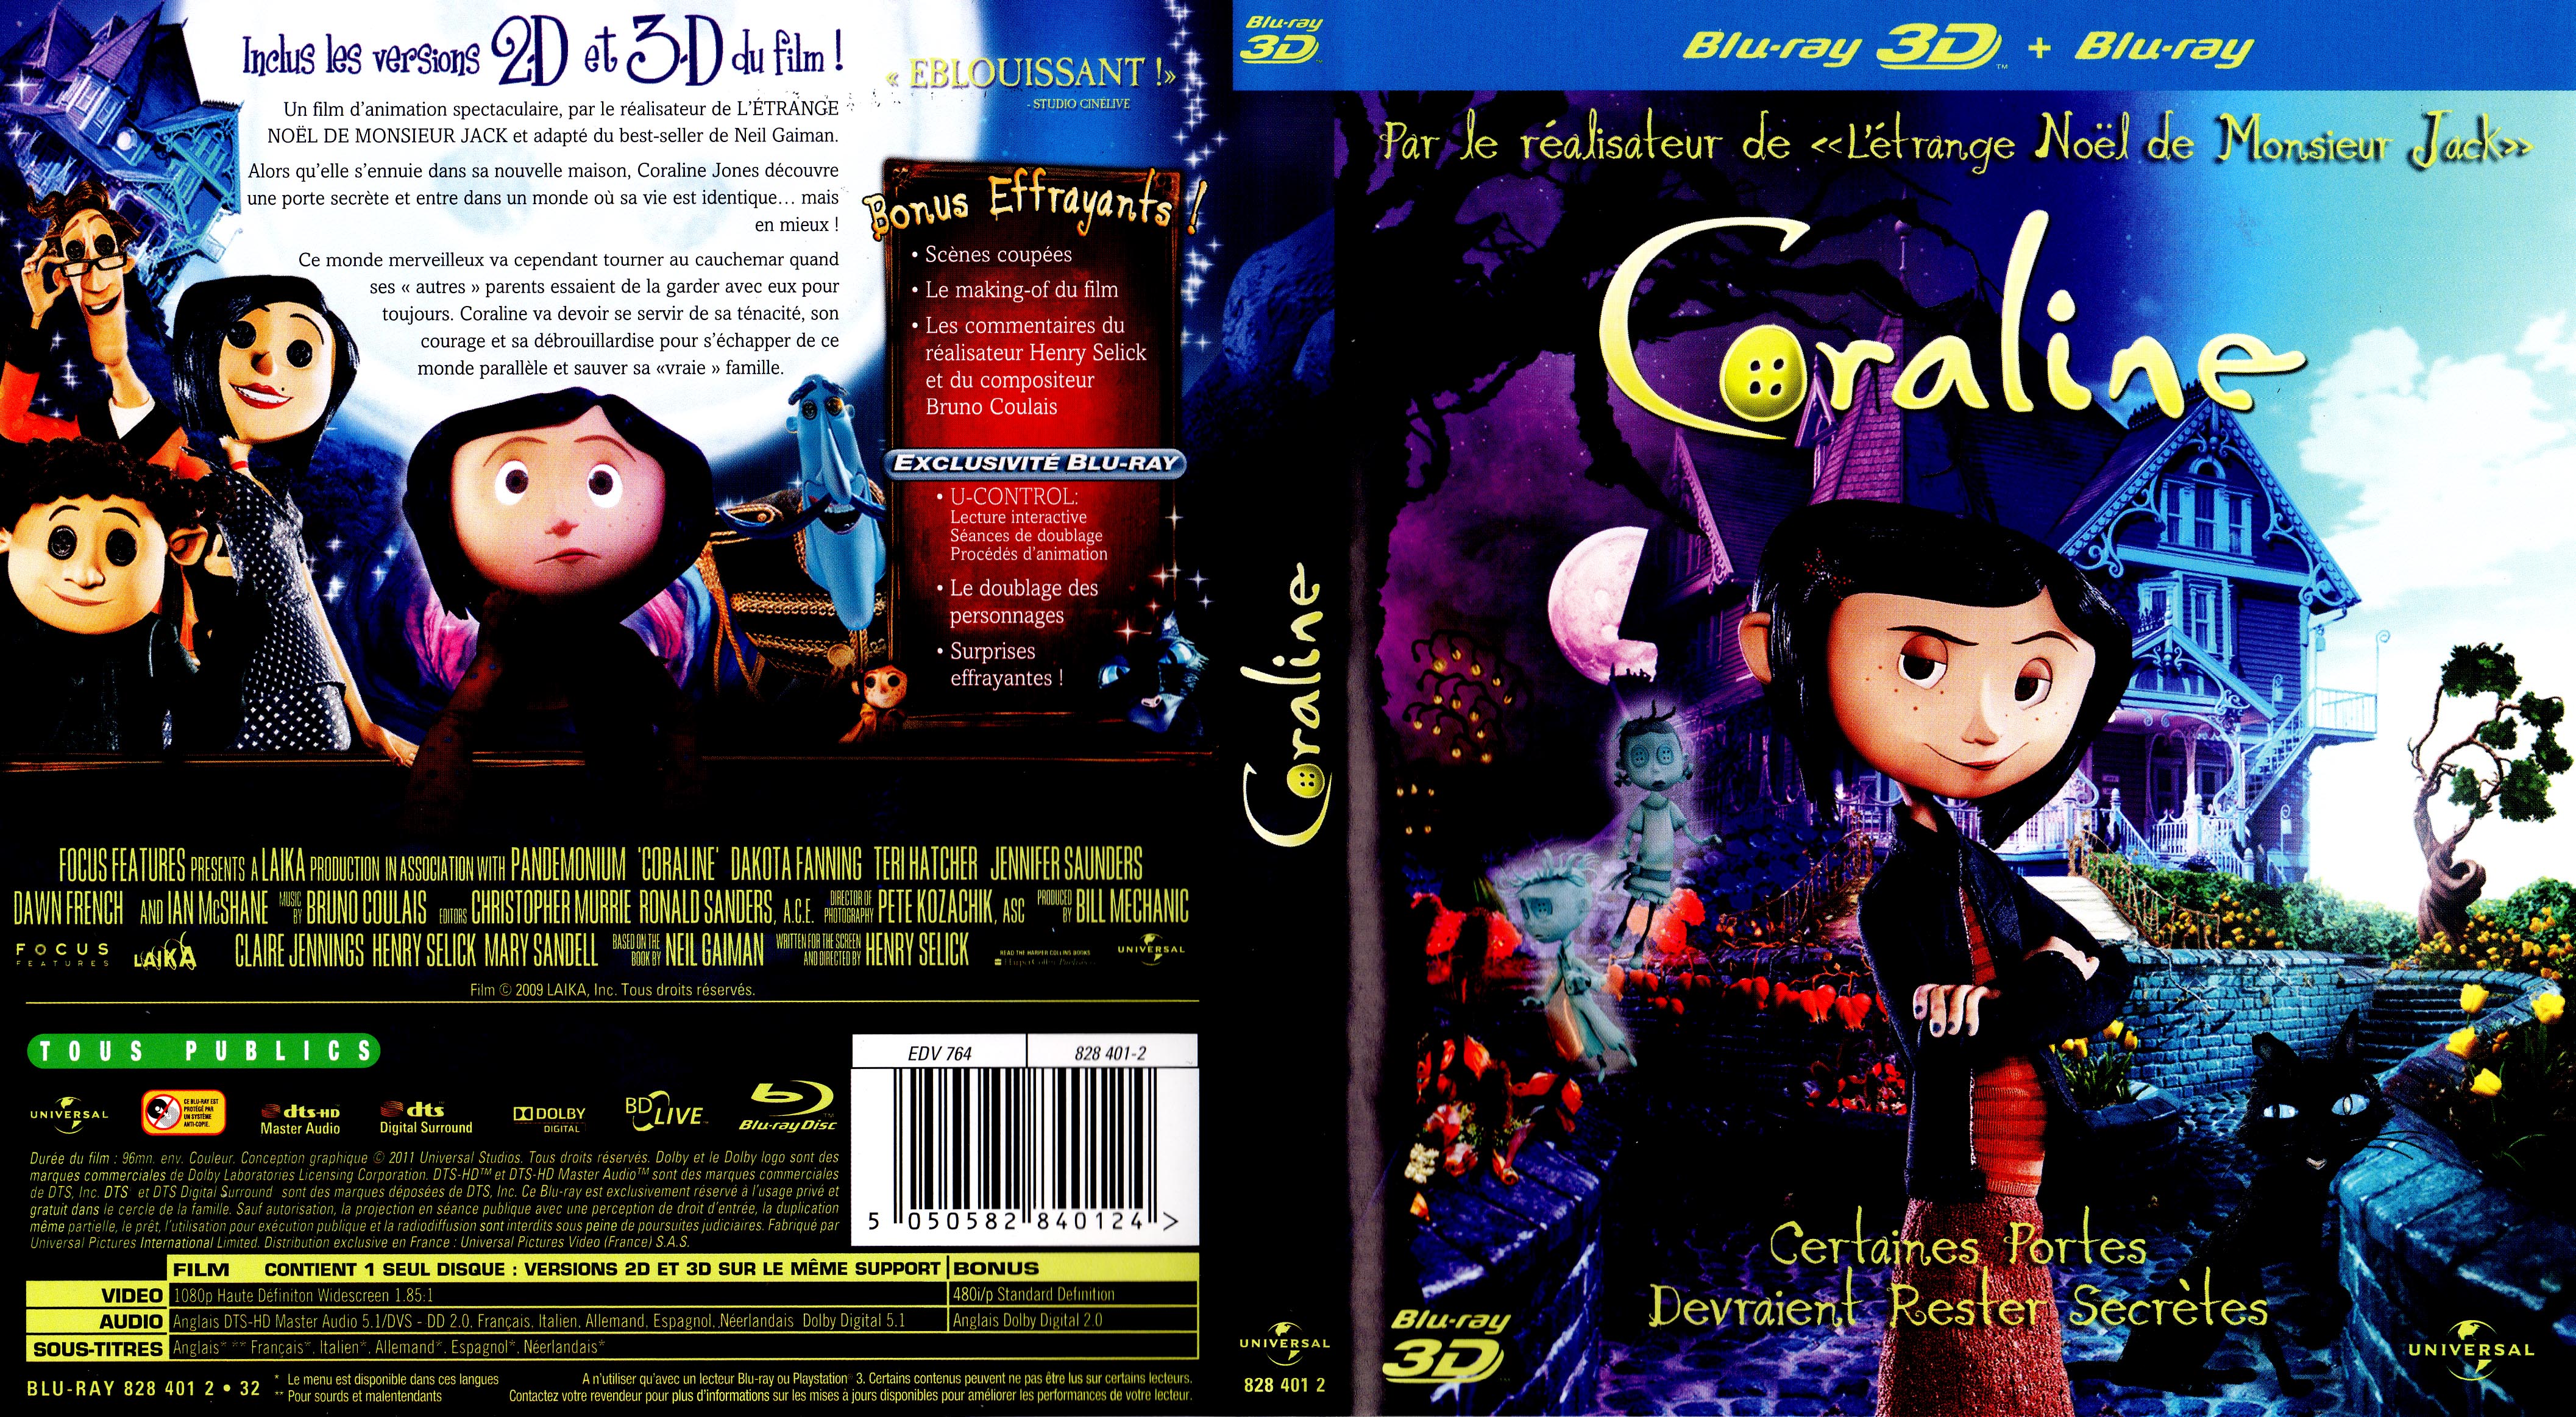 Jaquette DVD Coraline 3D (BLU-RAY)